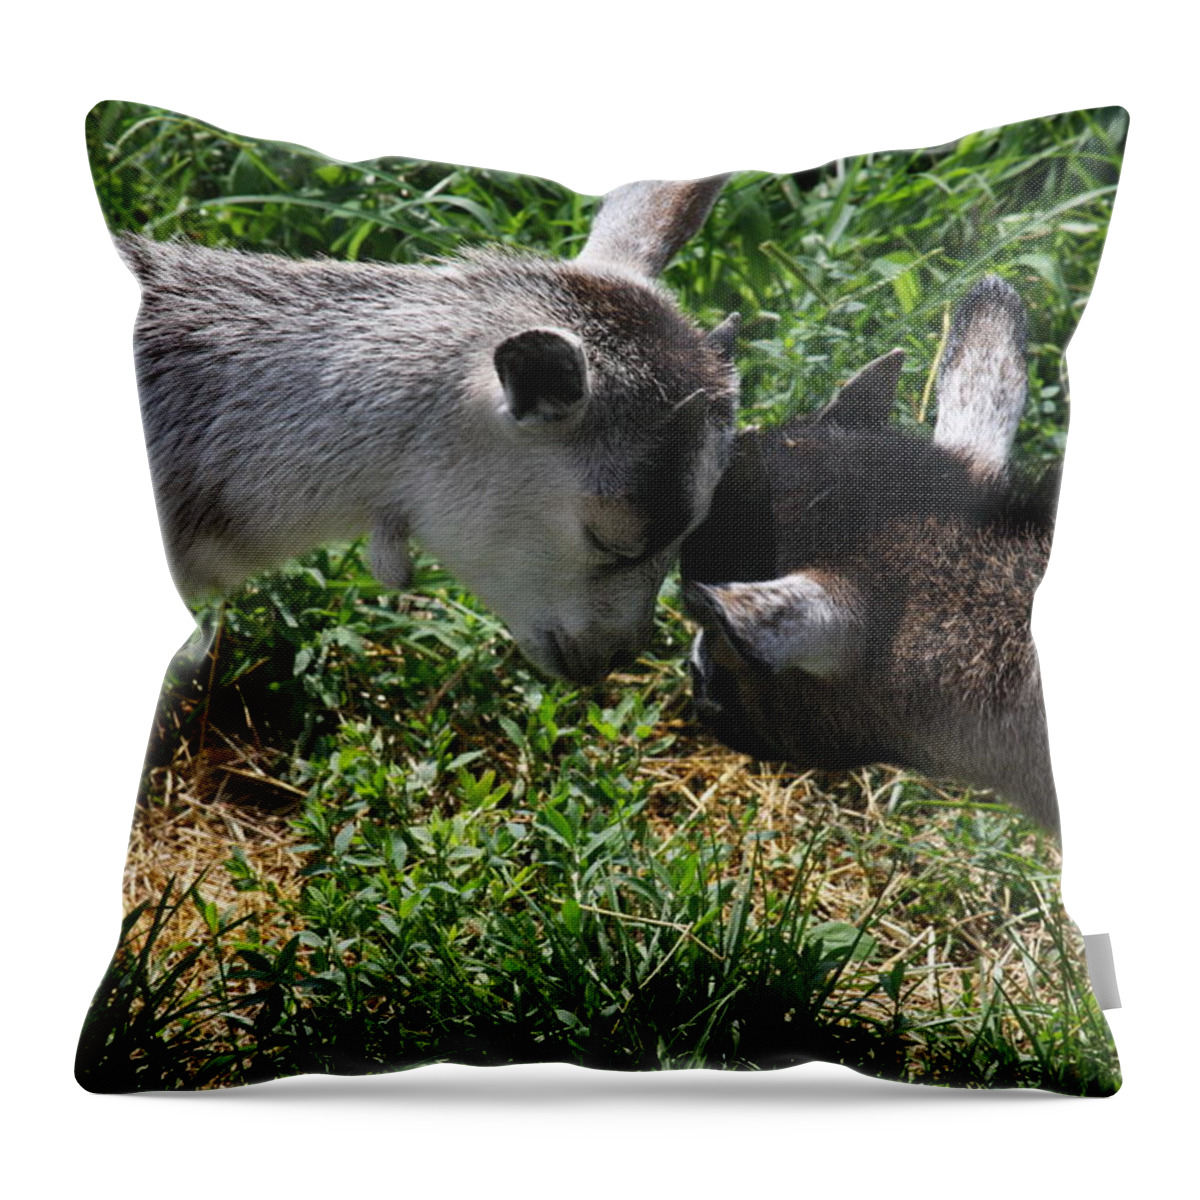 Humor Throw Pillow featuring the photograph A Wisdom of the Head? by Vadim Levin